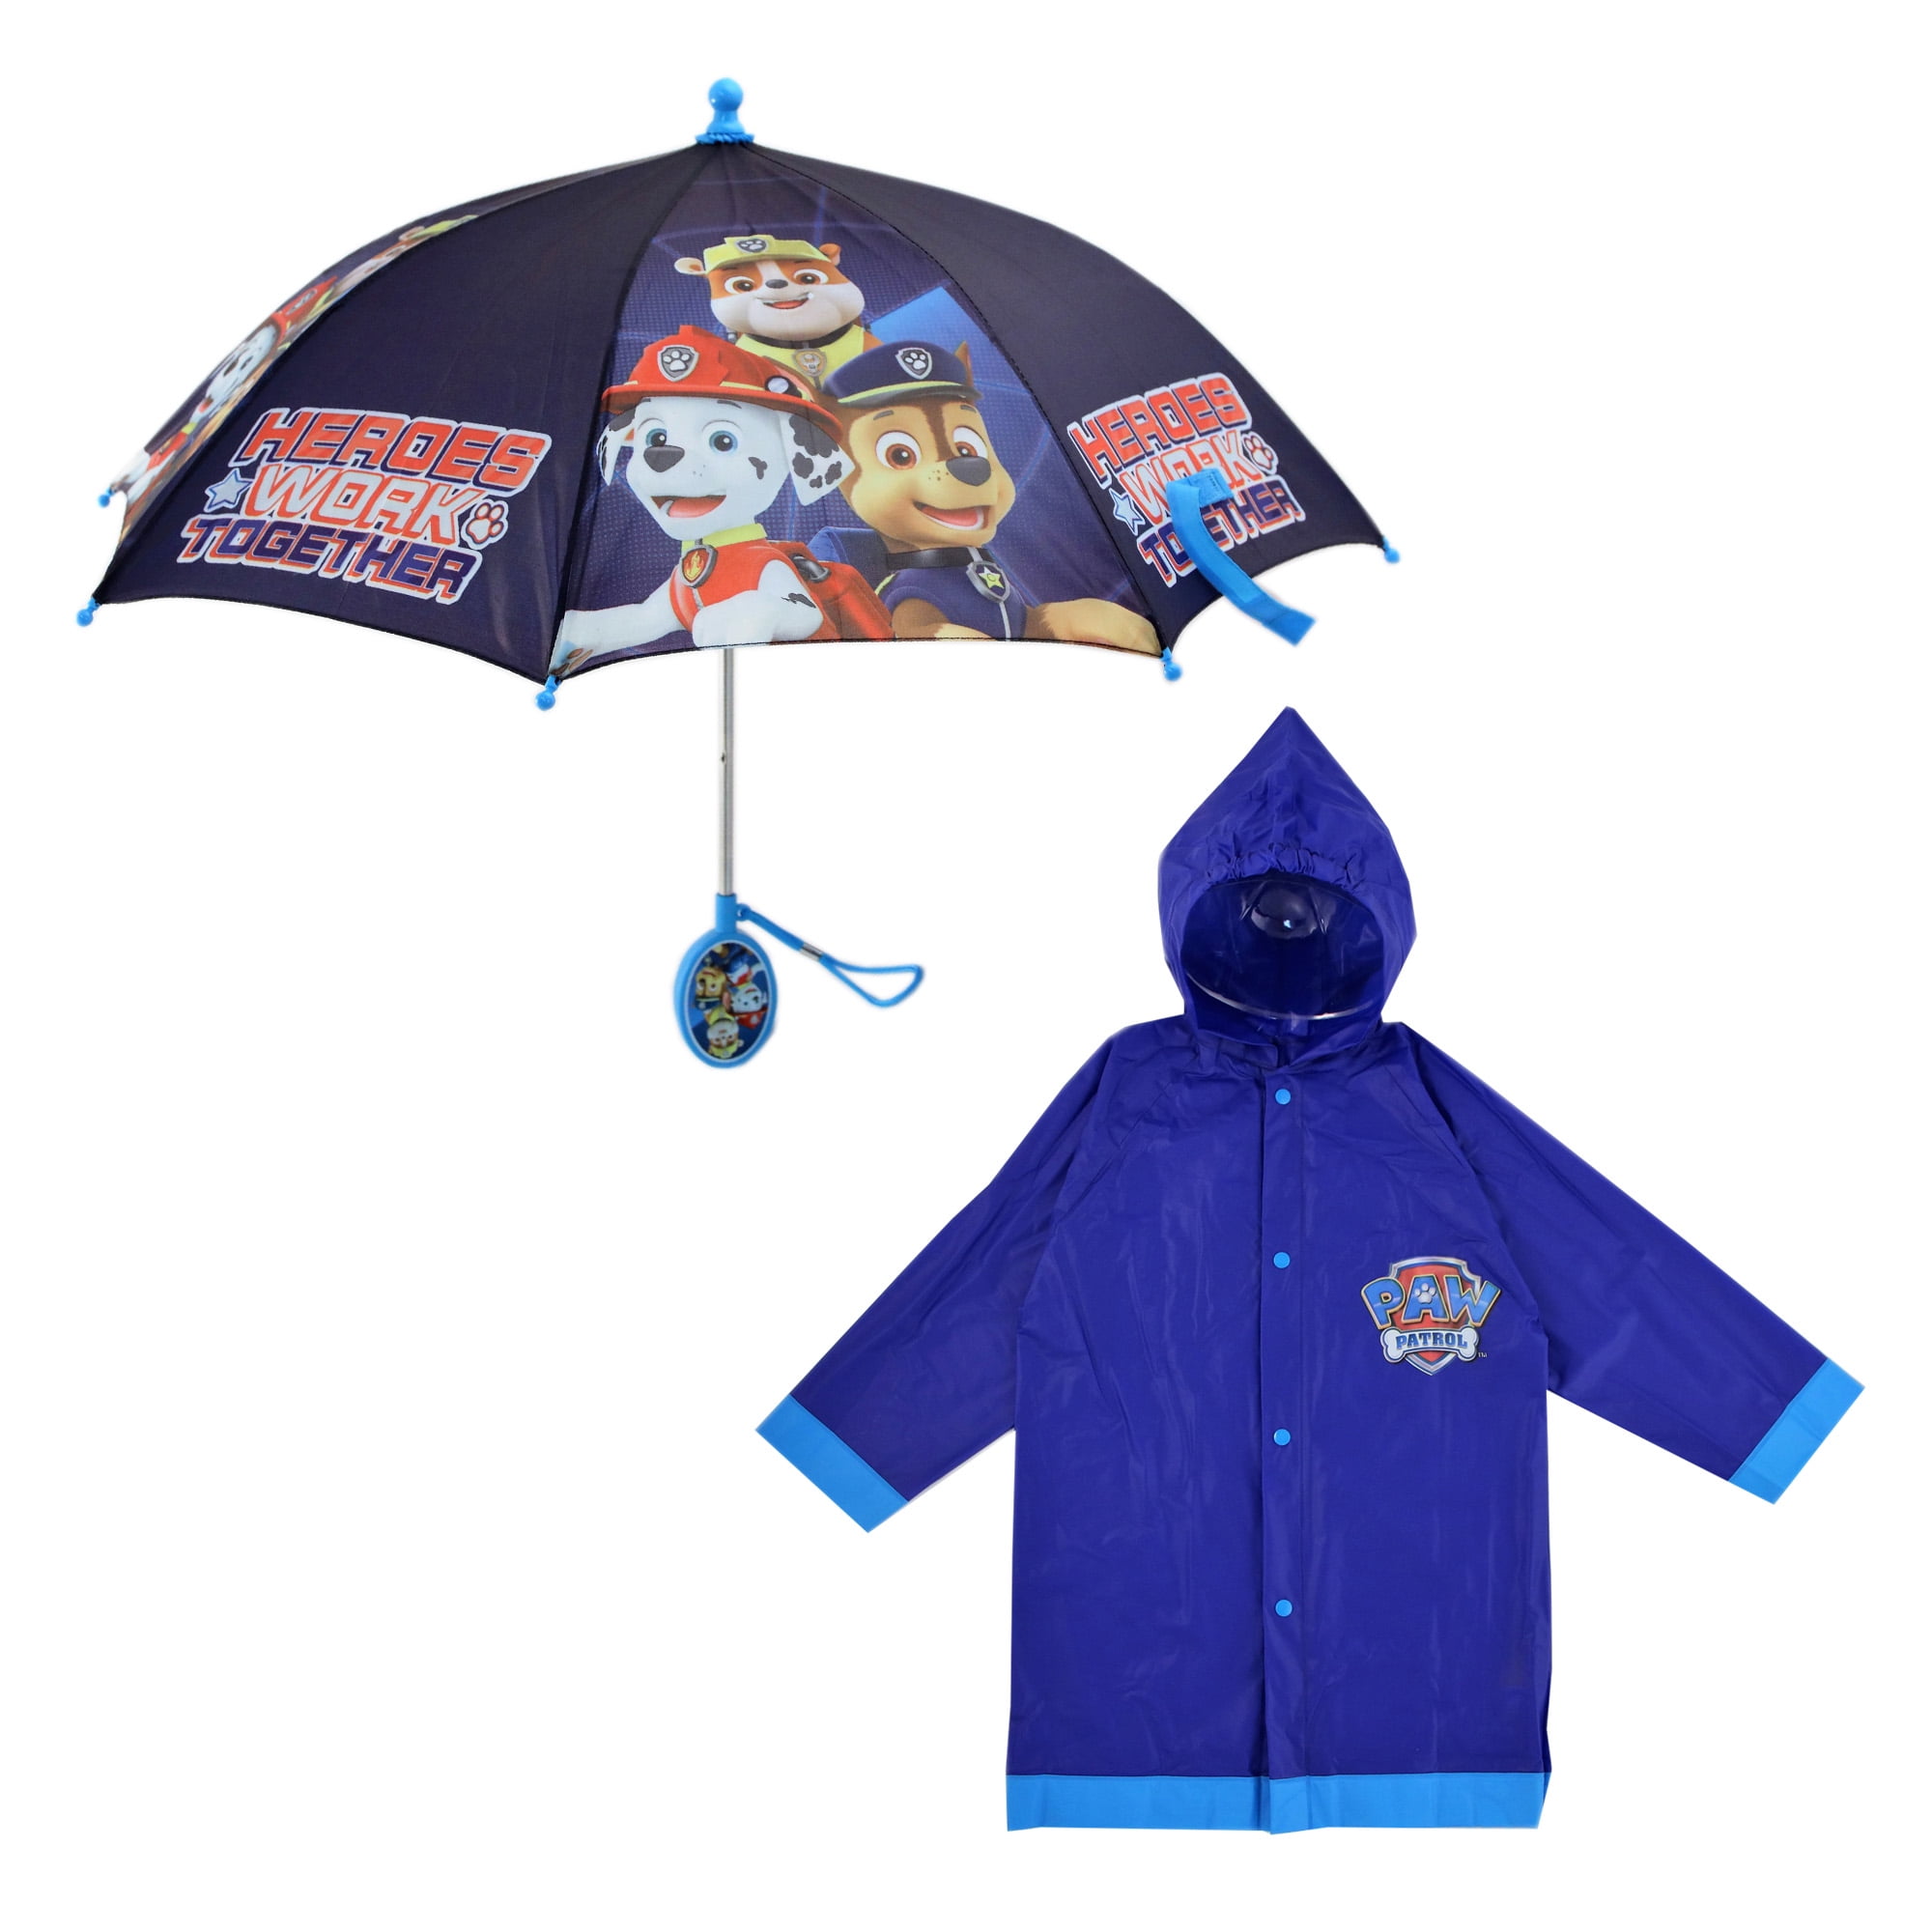 My Little Pony Toddler and Little Girl Rain Wear for Ages 3-6 Hasbro Kids Umbrella 